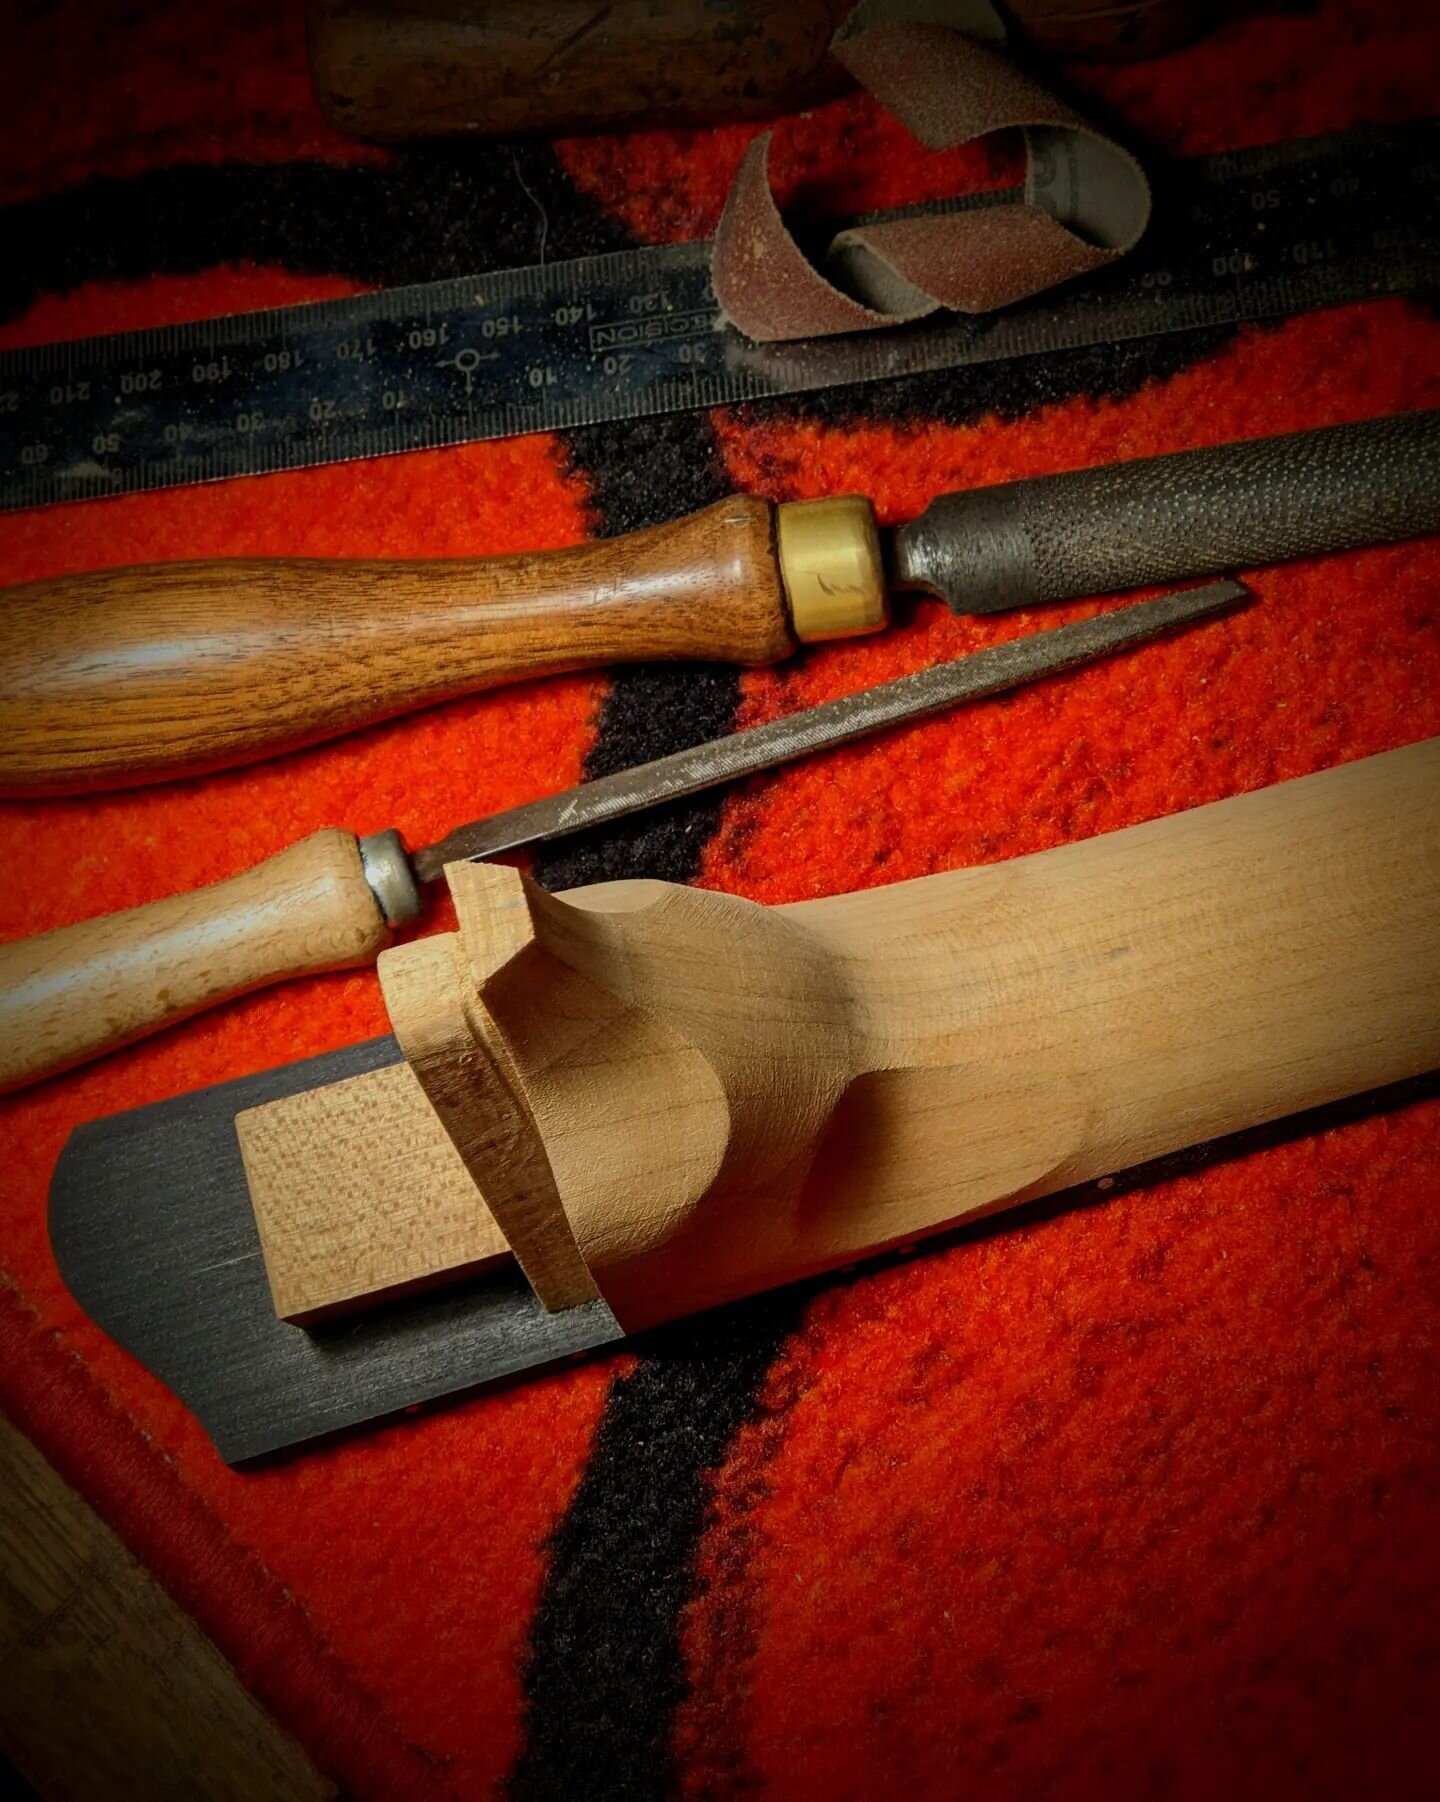 I've been slowly but surely refining the neck of this tenor uke. The transition areas of the volute and of course the fox heel are crucial to get right, and cannot be rushed. 

This particular neck is made from a European sycamore board that was bake